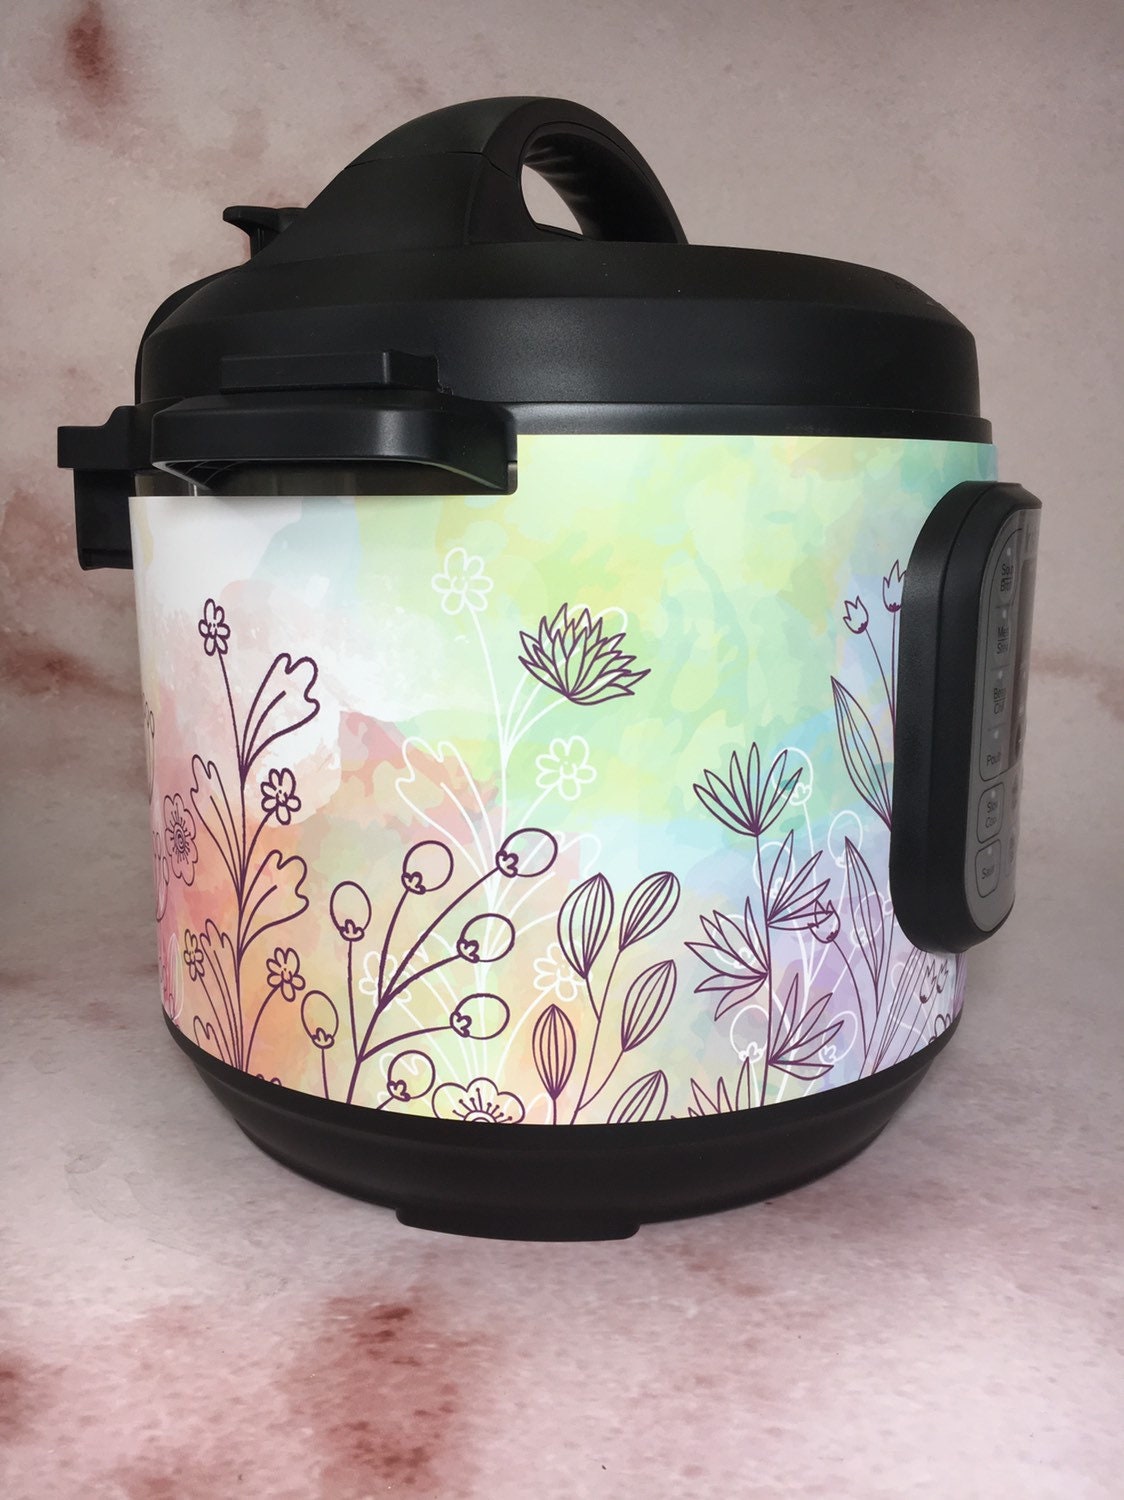 How to Make Vinyl Decals (+ Designs for Instant Pot, KitchenAid